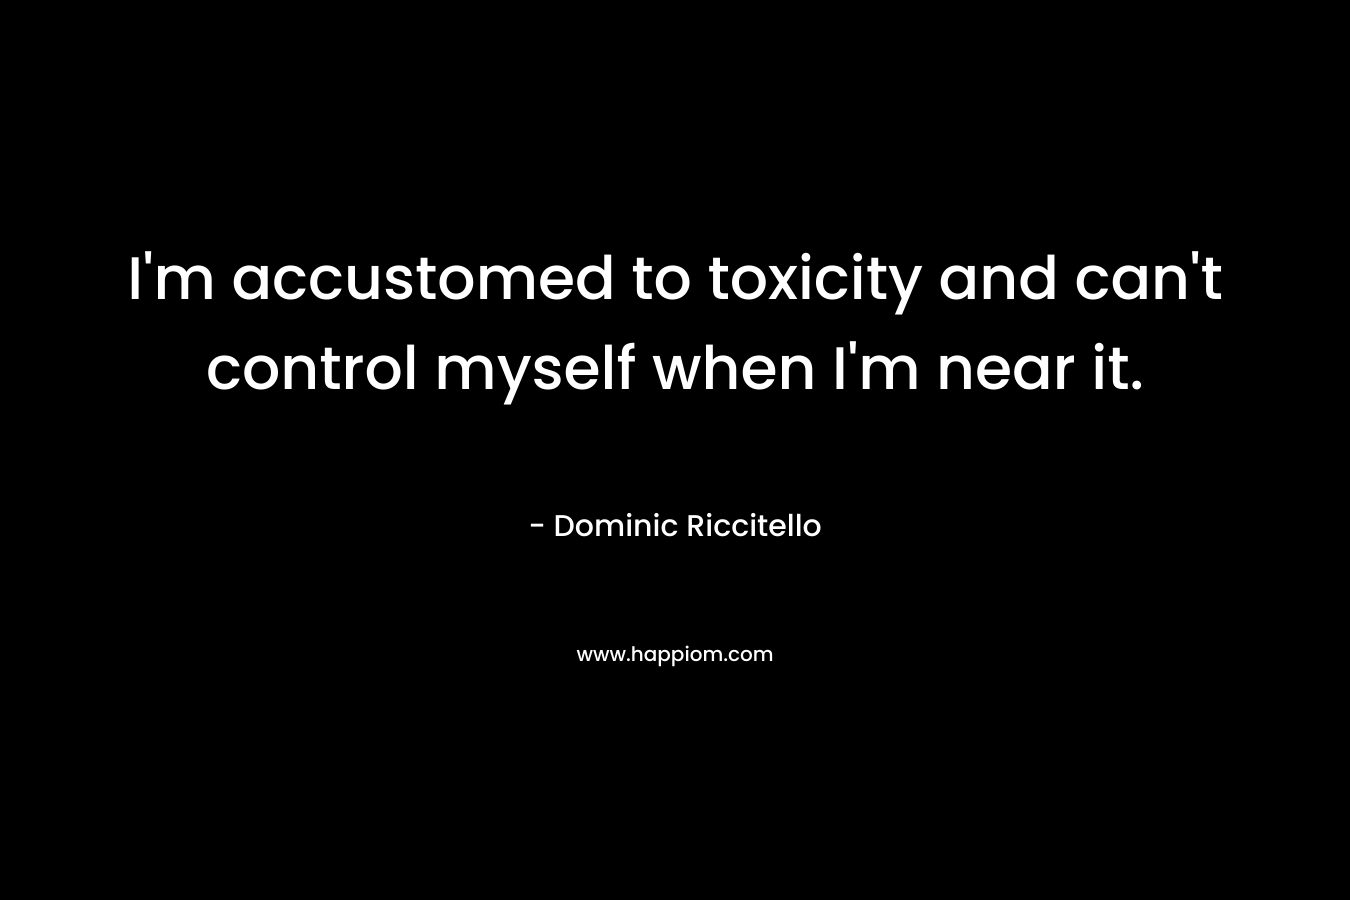 I'm accustomed to toxicity and can't control myself when I'm near it.